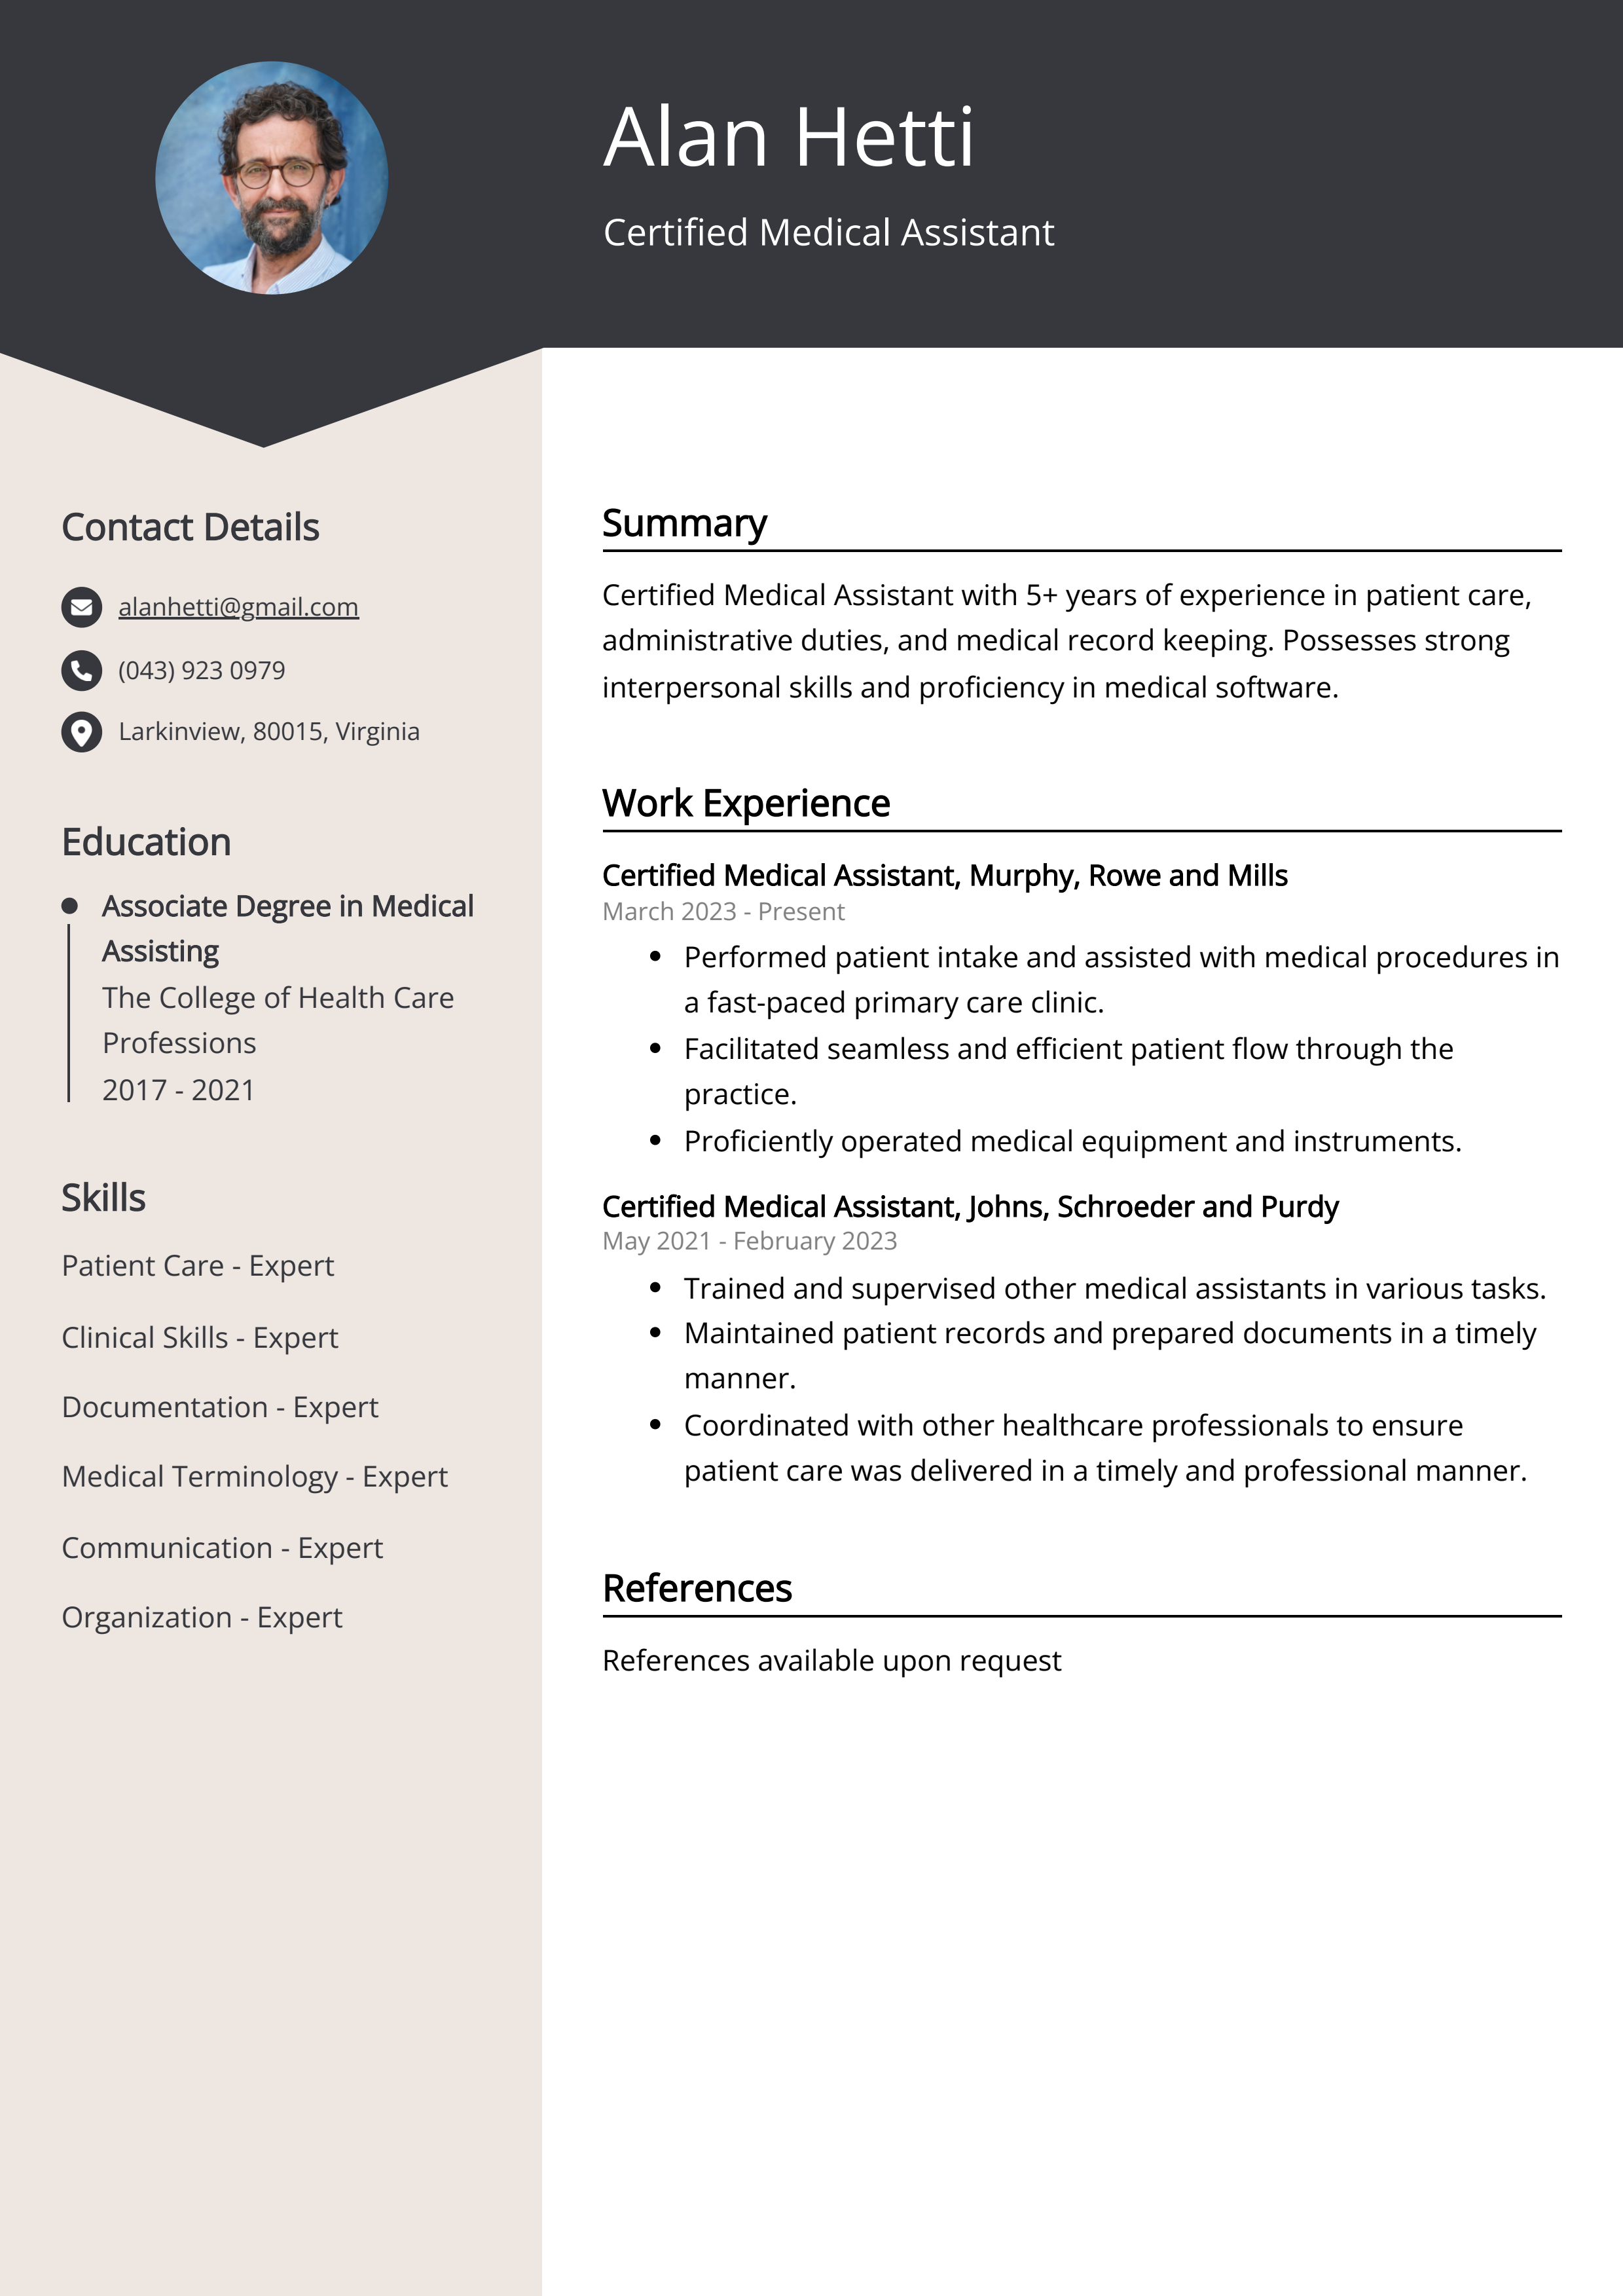 Certified Medical Assistant CV Example